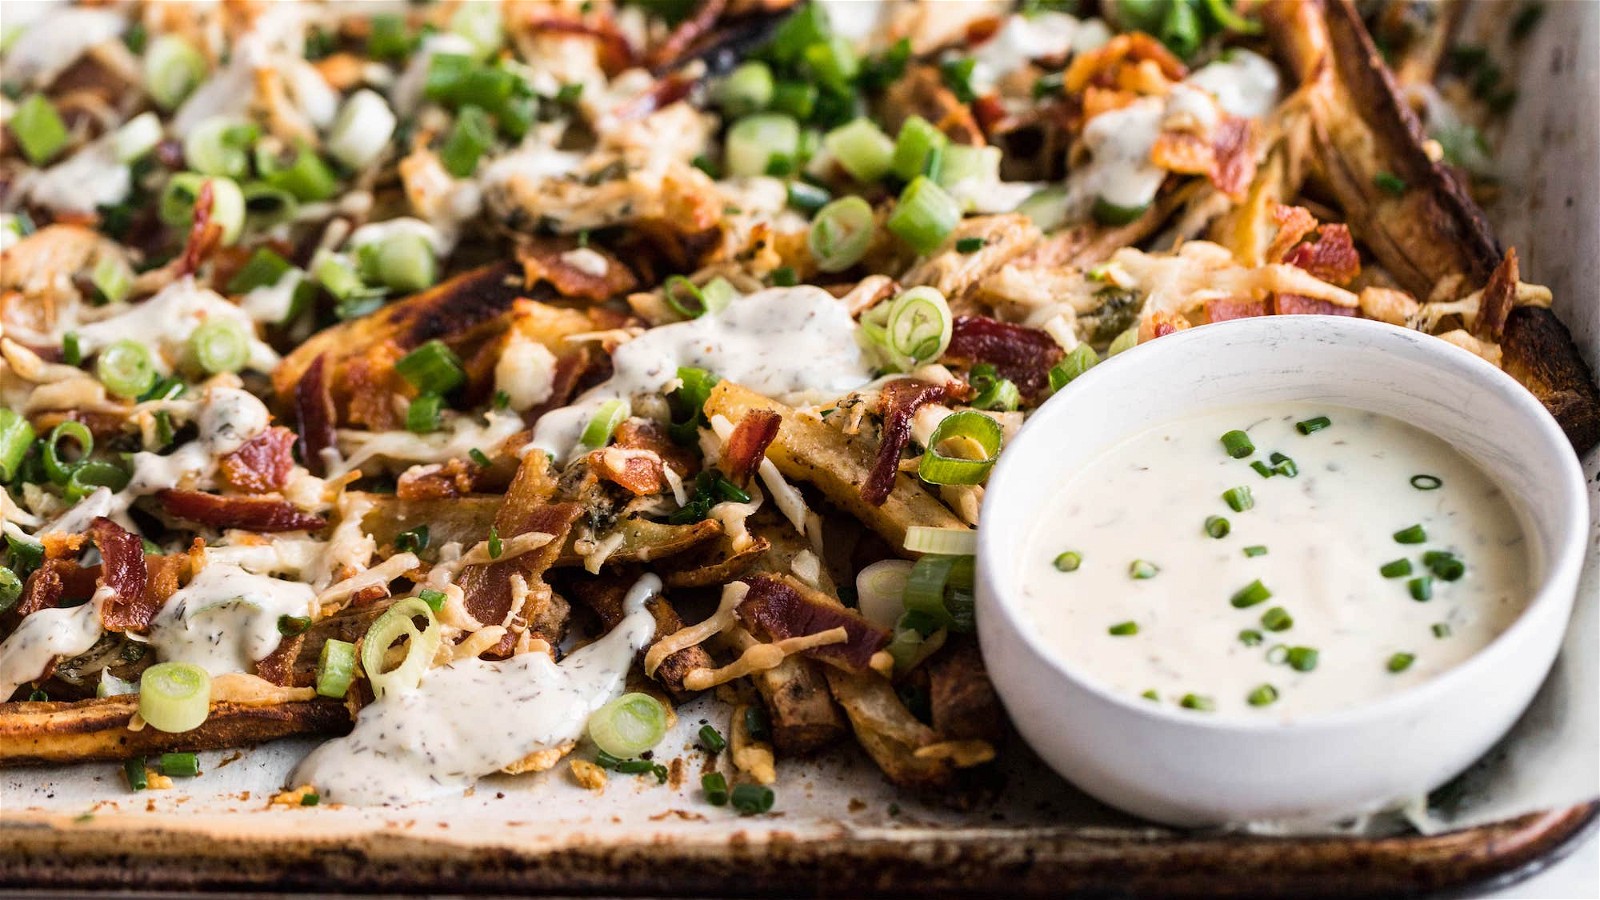 Image of Loaded Fries